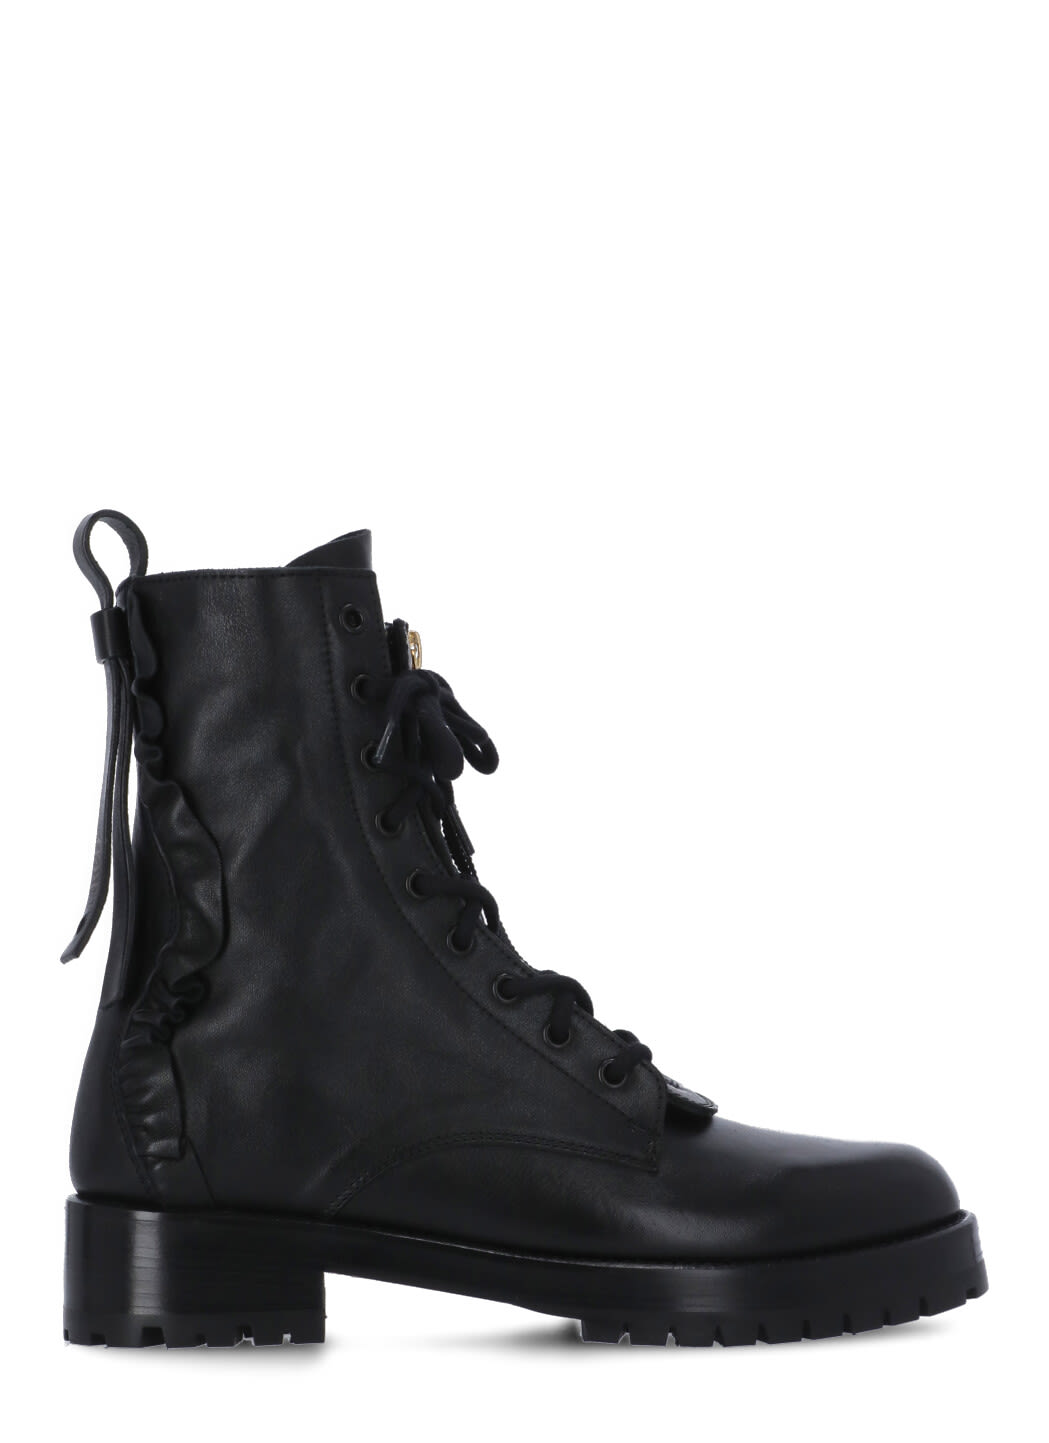 RED Valentino Leather Combat Boot